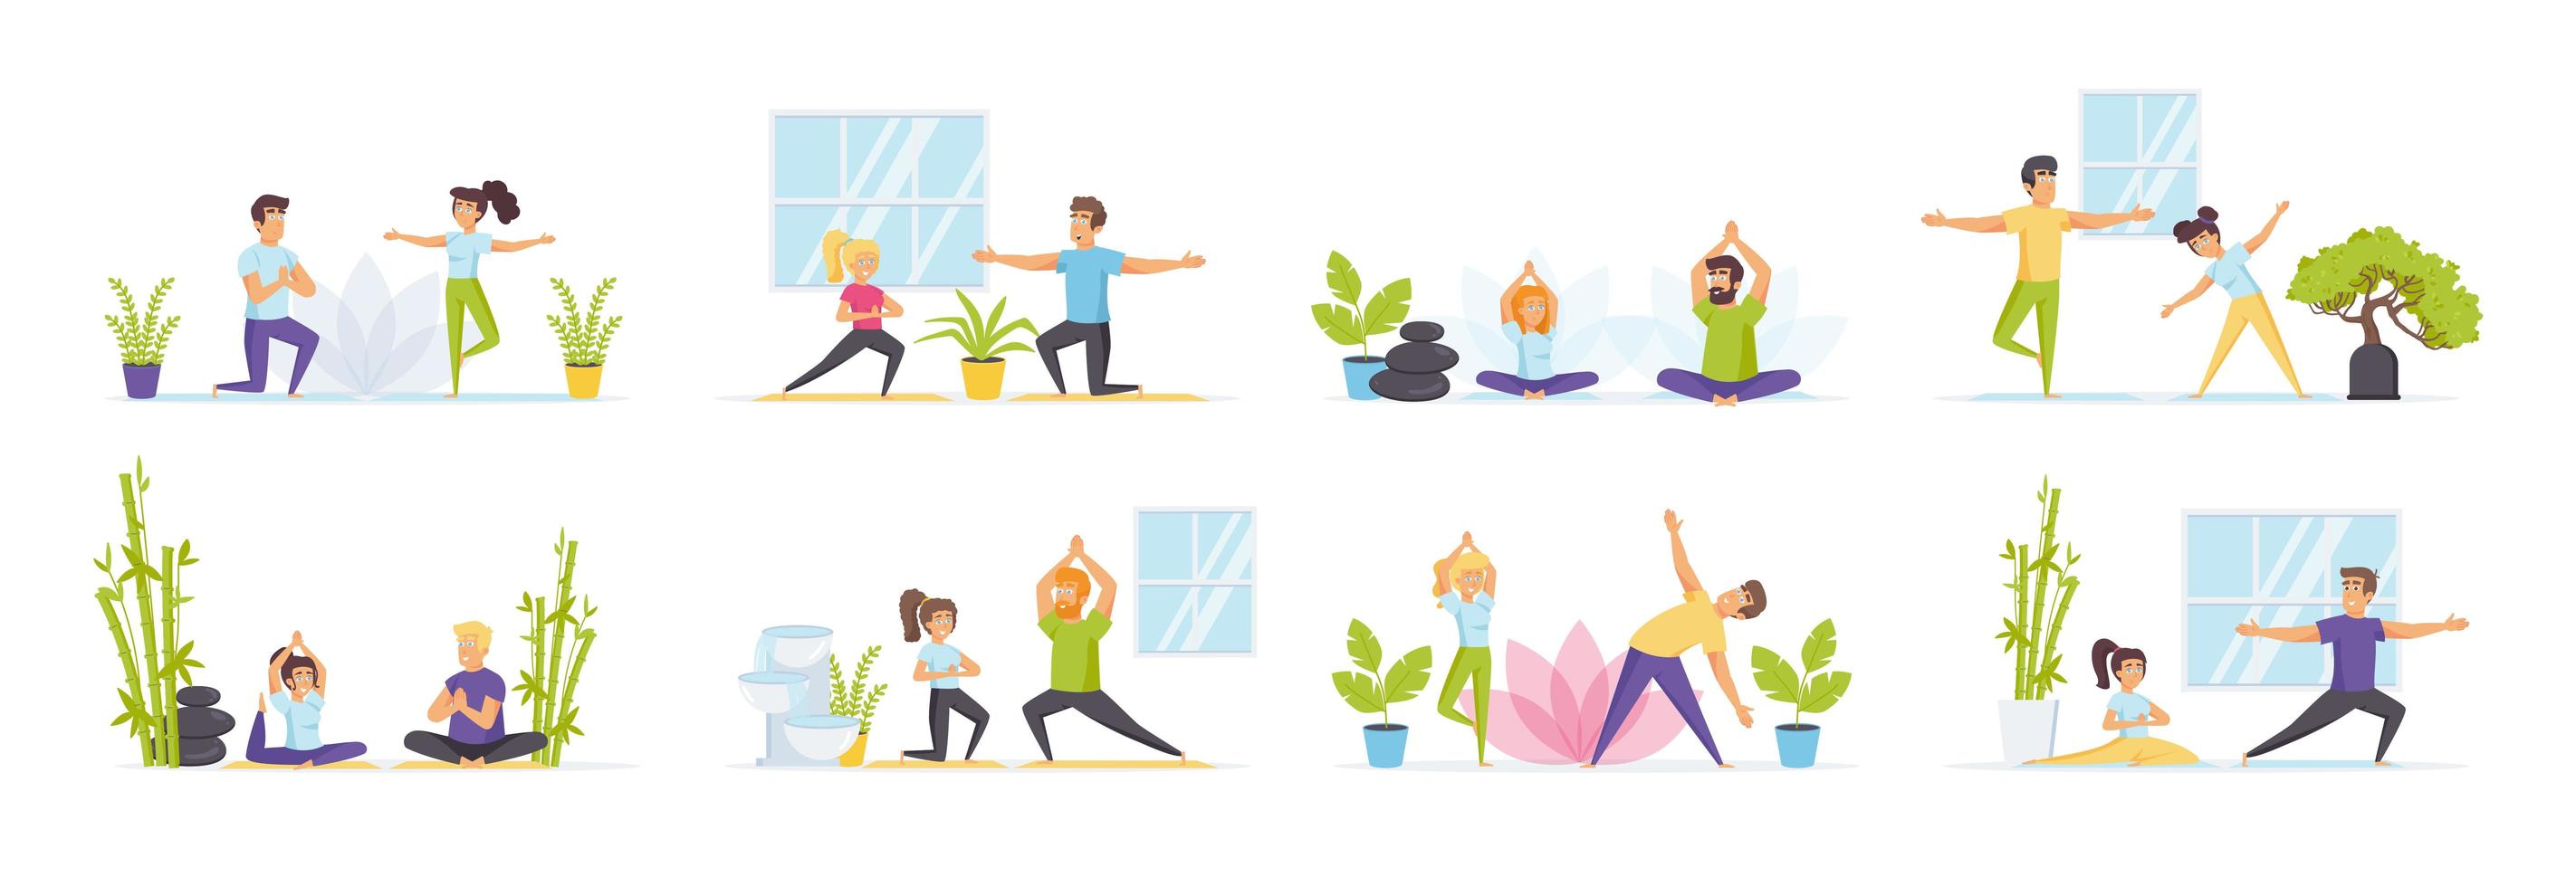 Family yoga set with people in various situations vector